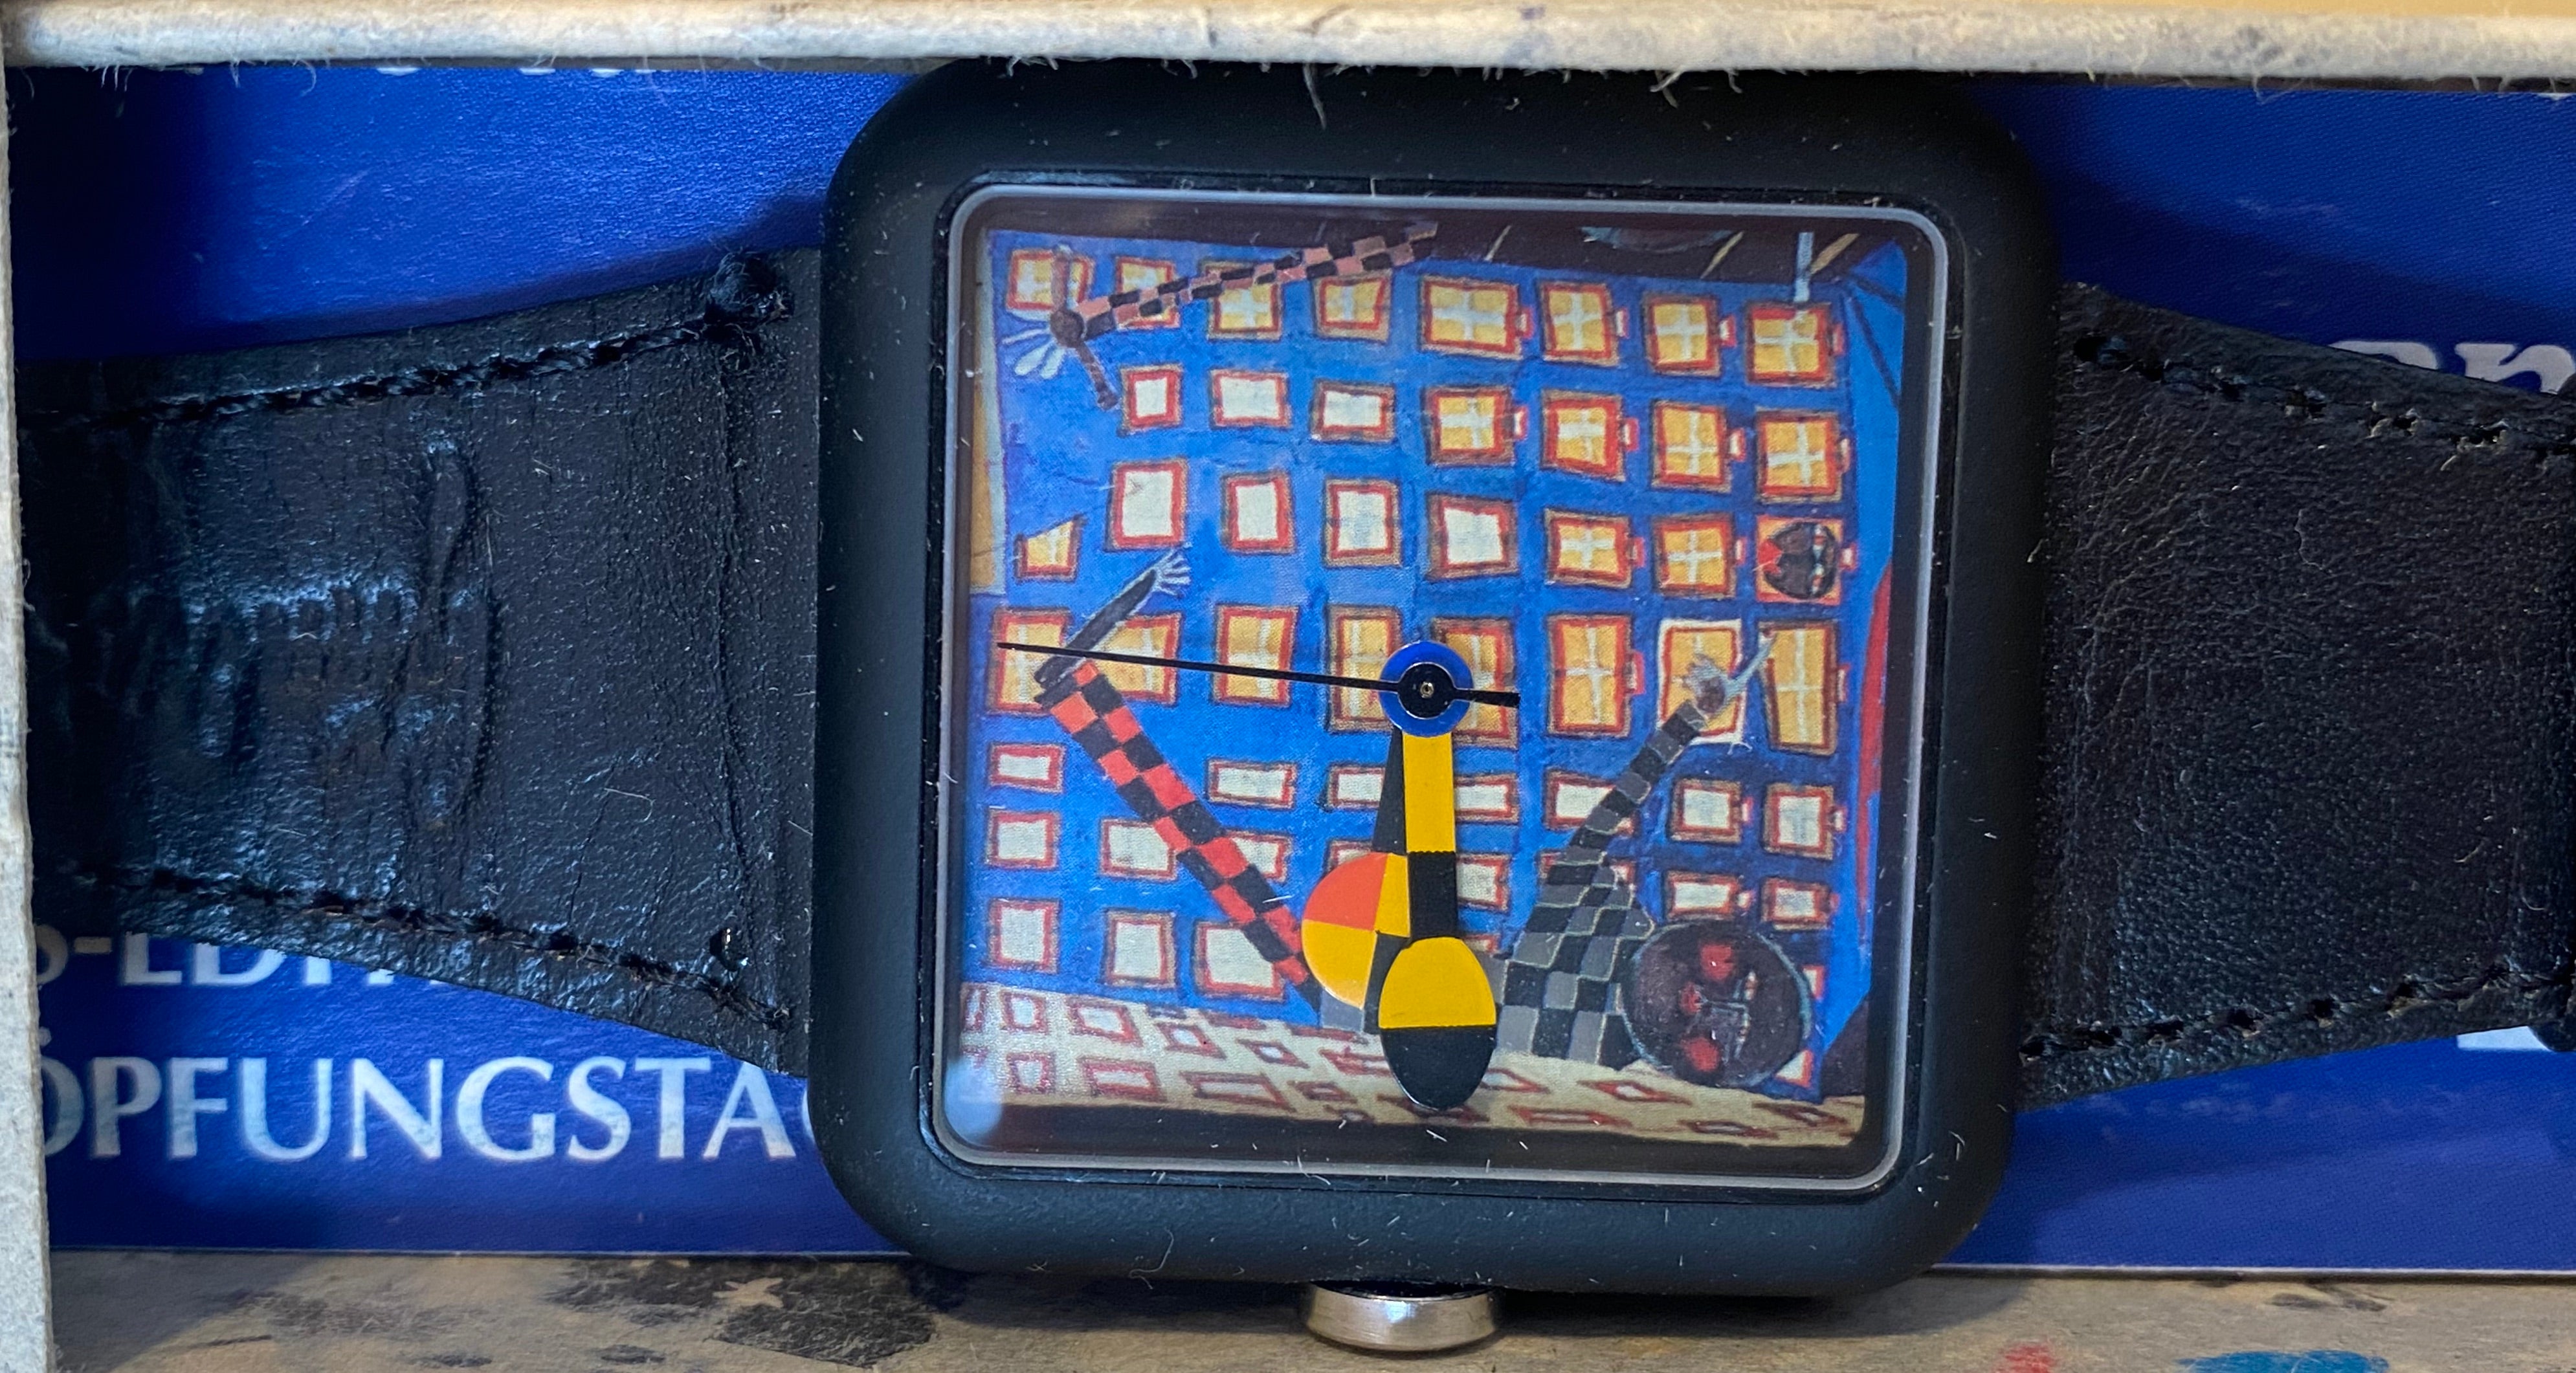 Watch designed by the Austrian artist Hundertwasser.
Rare watch, new from stock.
Sold with box and certificate.
Circa : 1995
Diameter : 4 cm
Length of the strap : 24 cm.